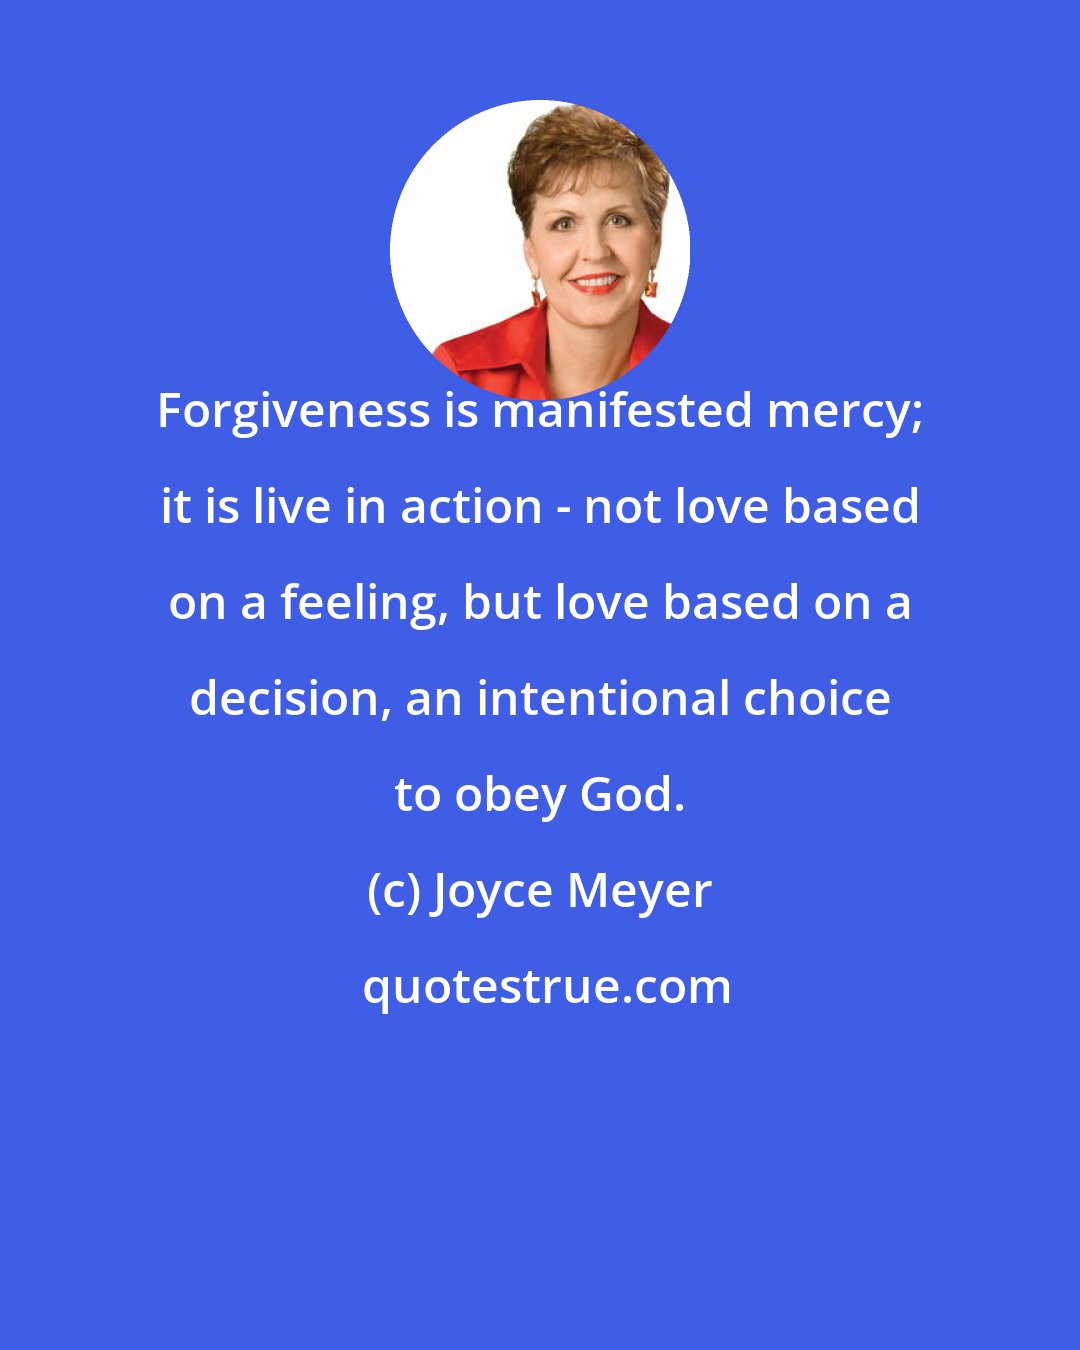 Joyce Meyer: Forgiveness is manifested mercy; it is live in action - not love based on a feeling, but love based on a decision, an intentional choice to obey God.